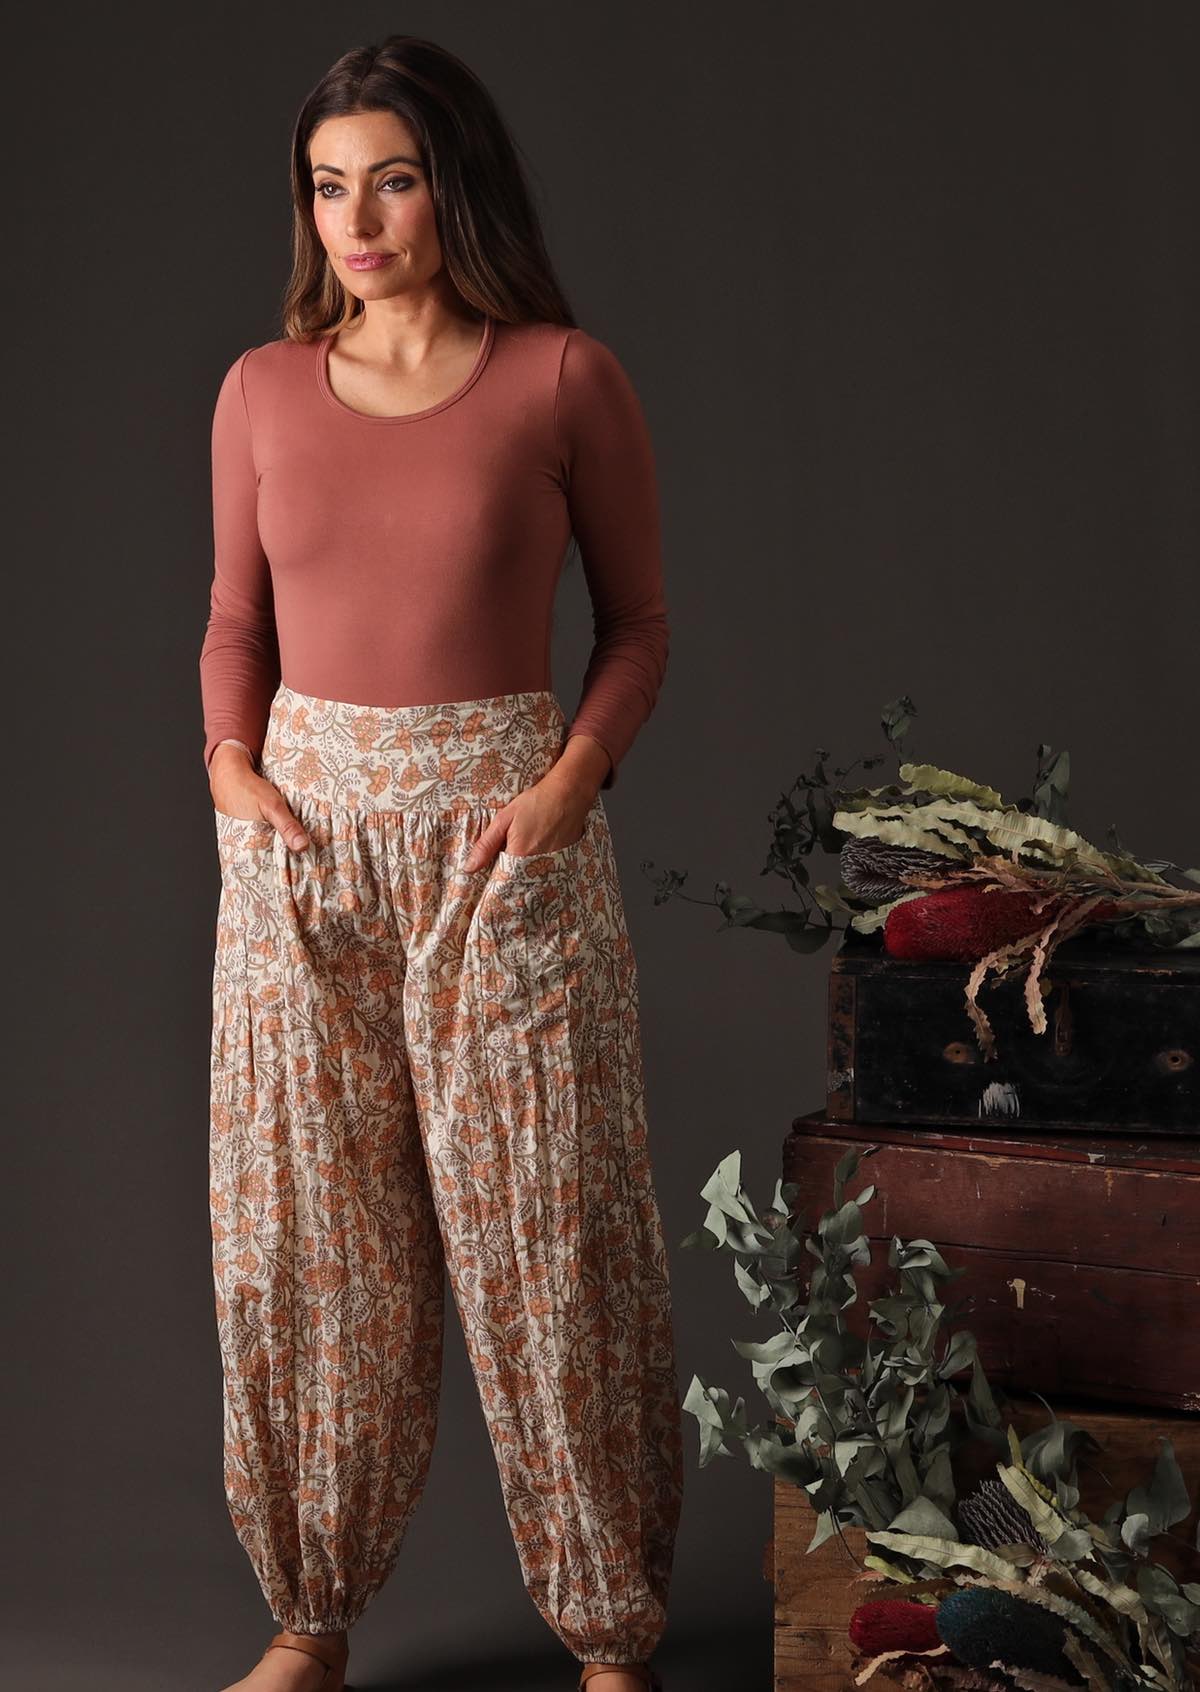 A model wears loose fitting cotton pants